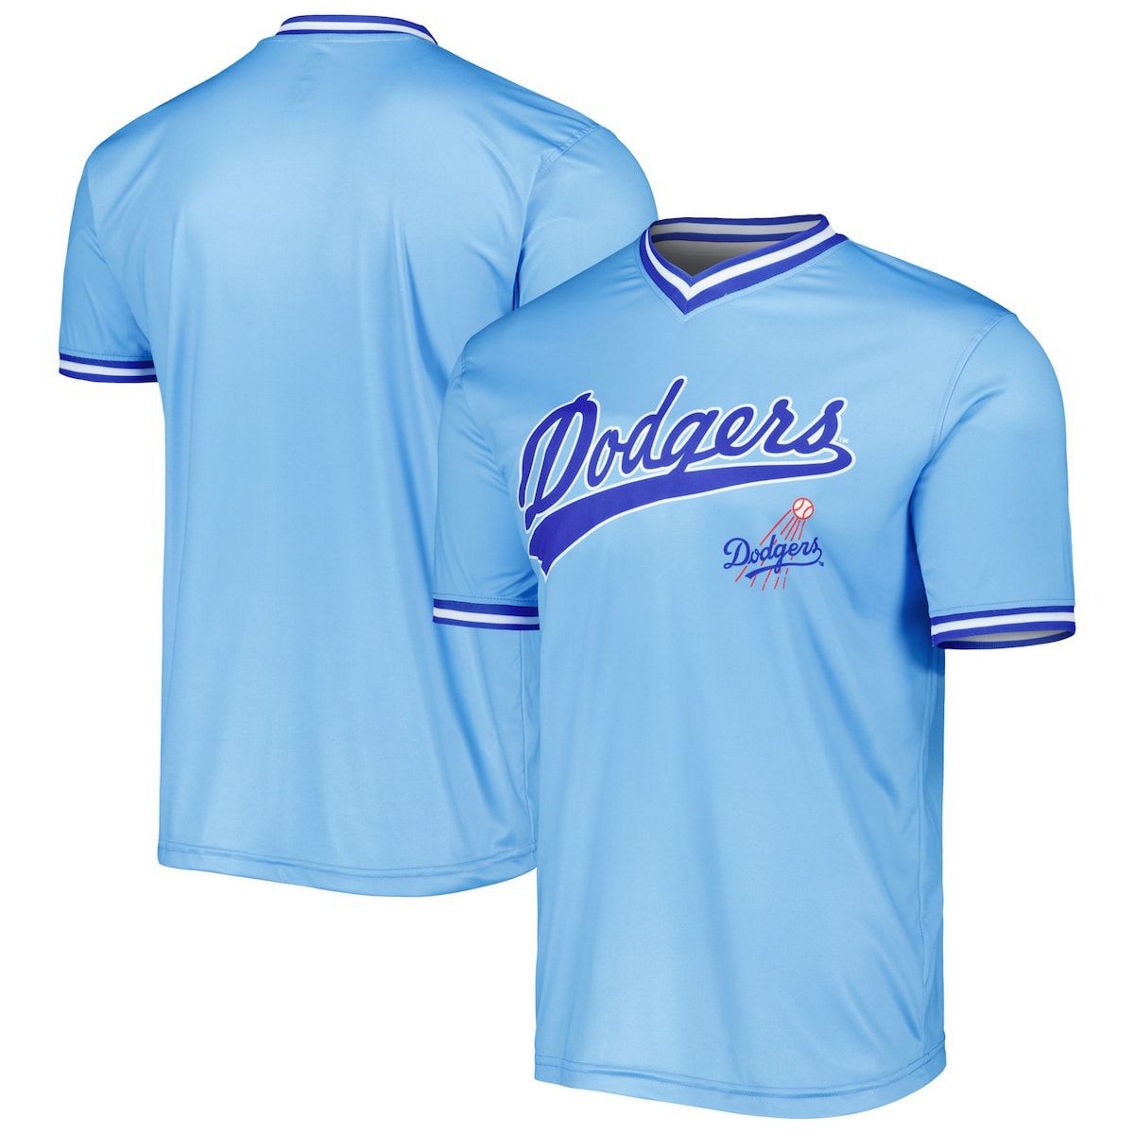 Stitches Men's Light Blue Los Angeles Dodgers Cooperstown Collection Team Jersey - Image 2 of 4